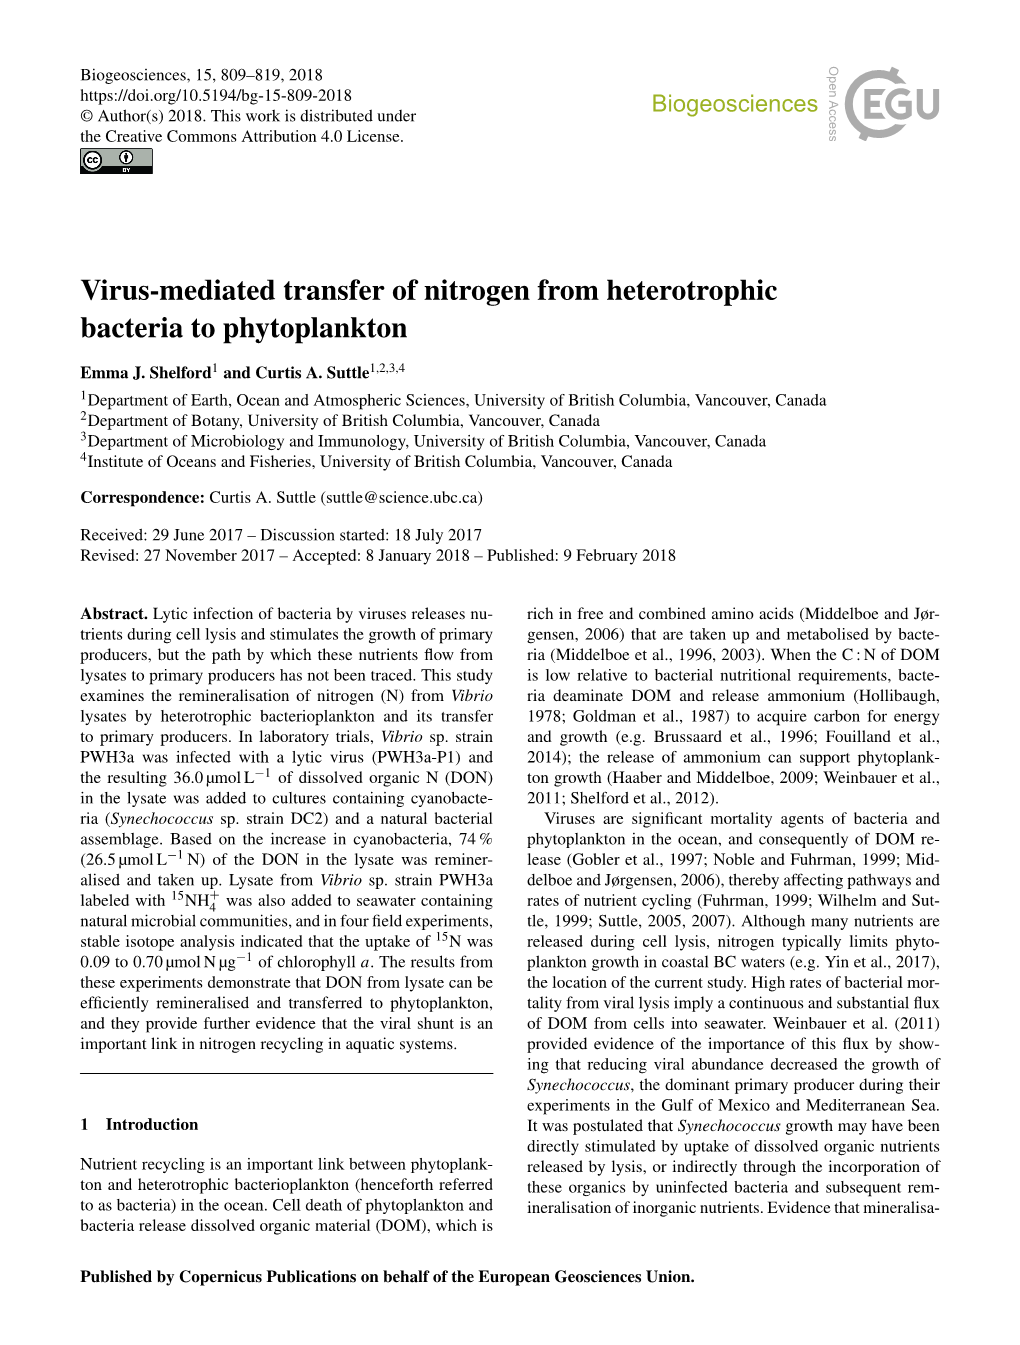 Article Is Available Ral Lysis of Bacteria in the Photic Zone